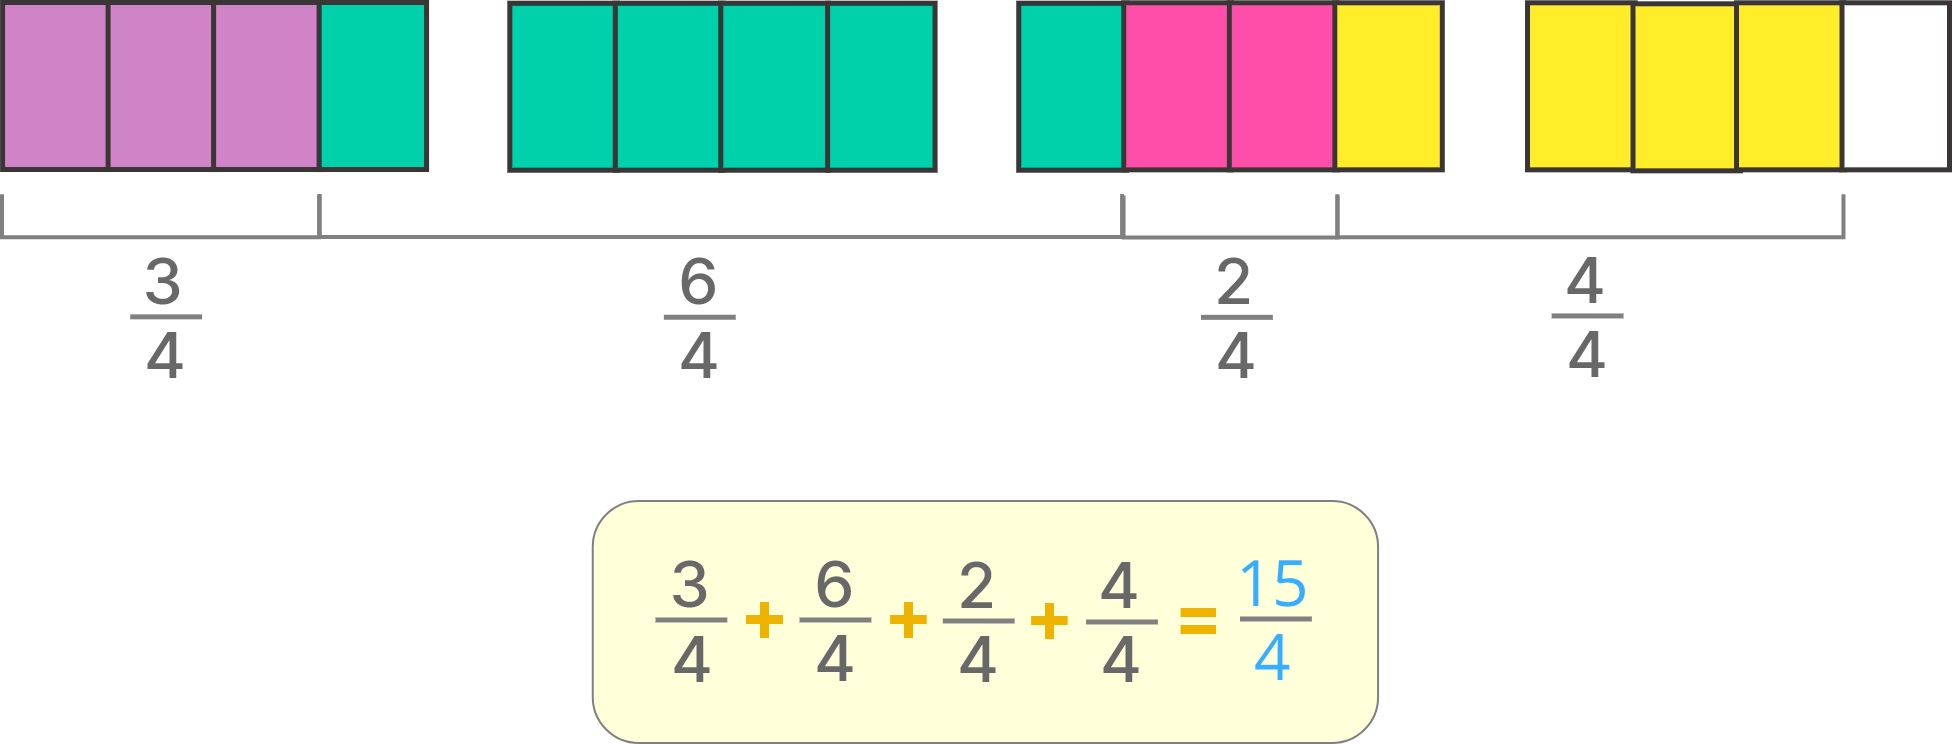 Breaking down the fraction 15/4 into 4 parts